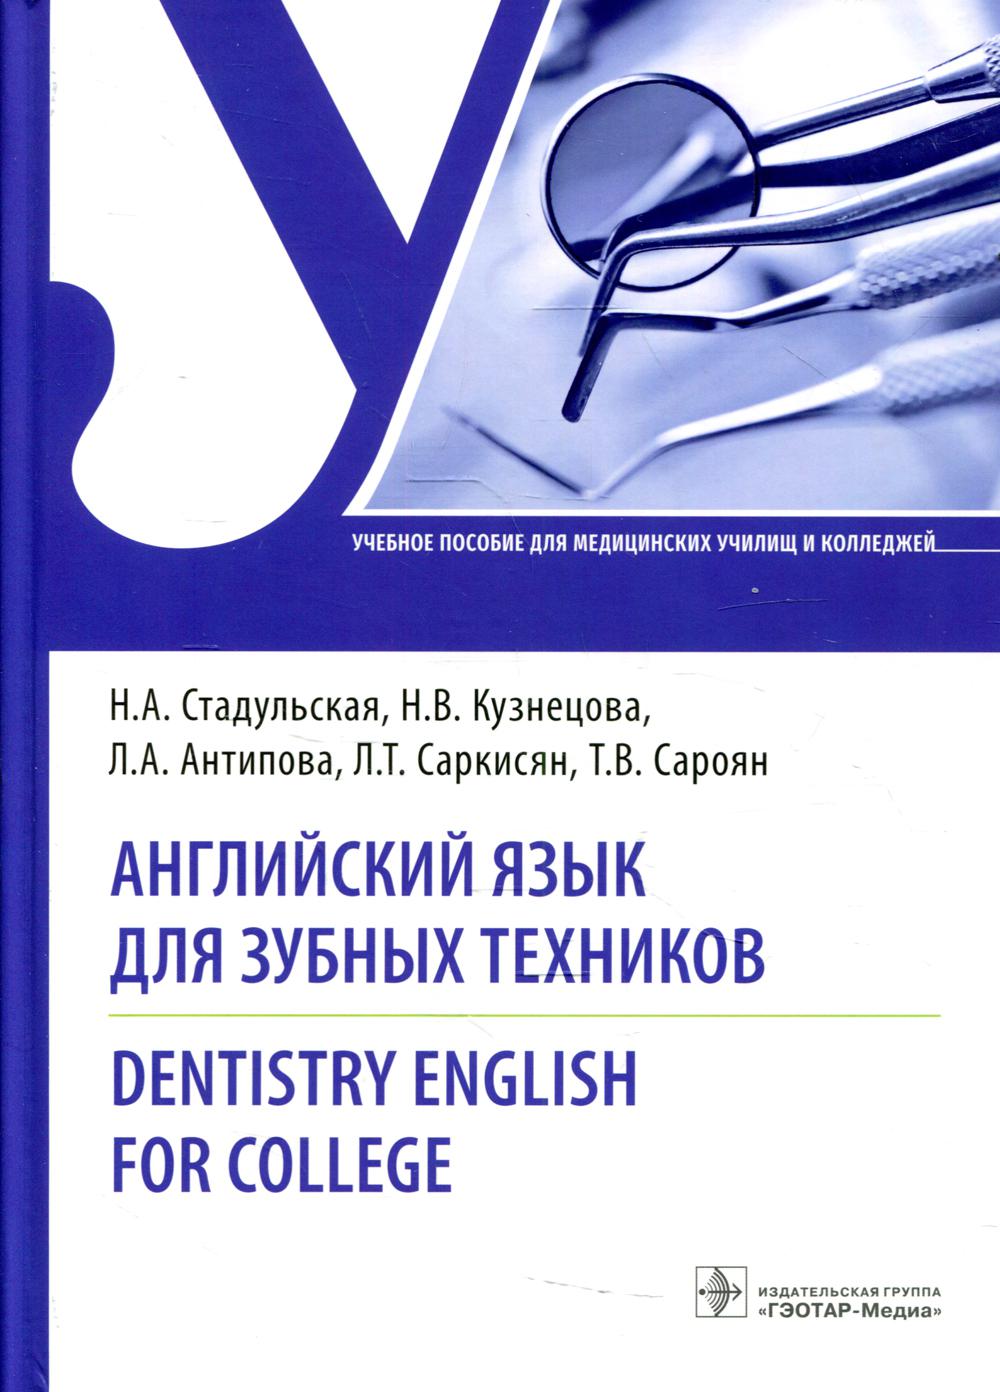     . Dentistry English for college :   (31.02.05       -  )